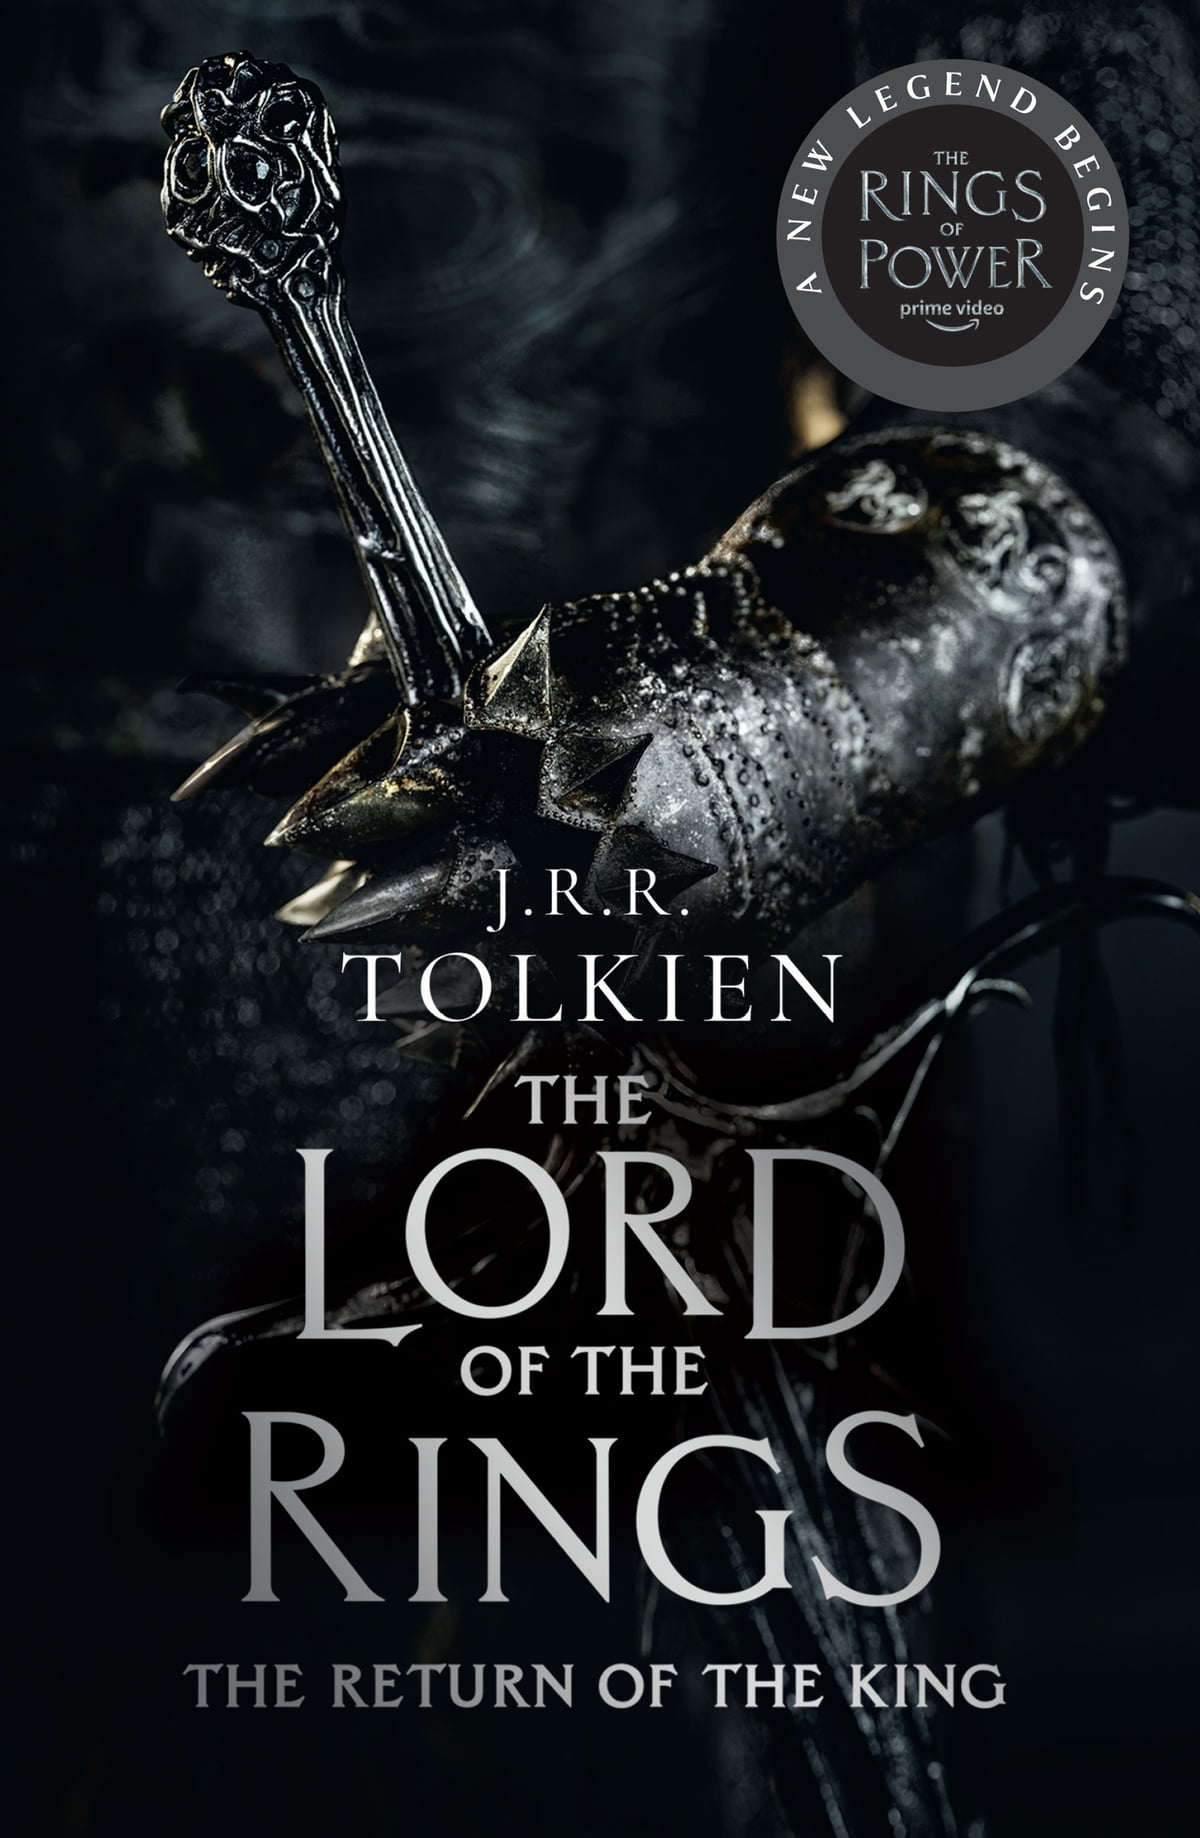 The Lord of the Rings by JRR Tolkien